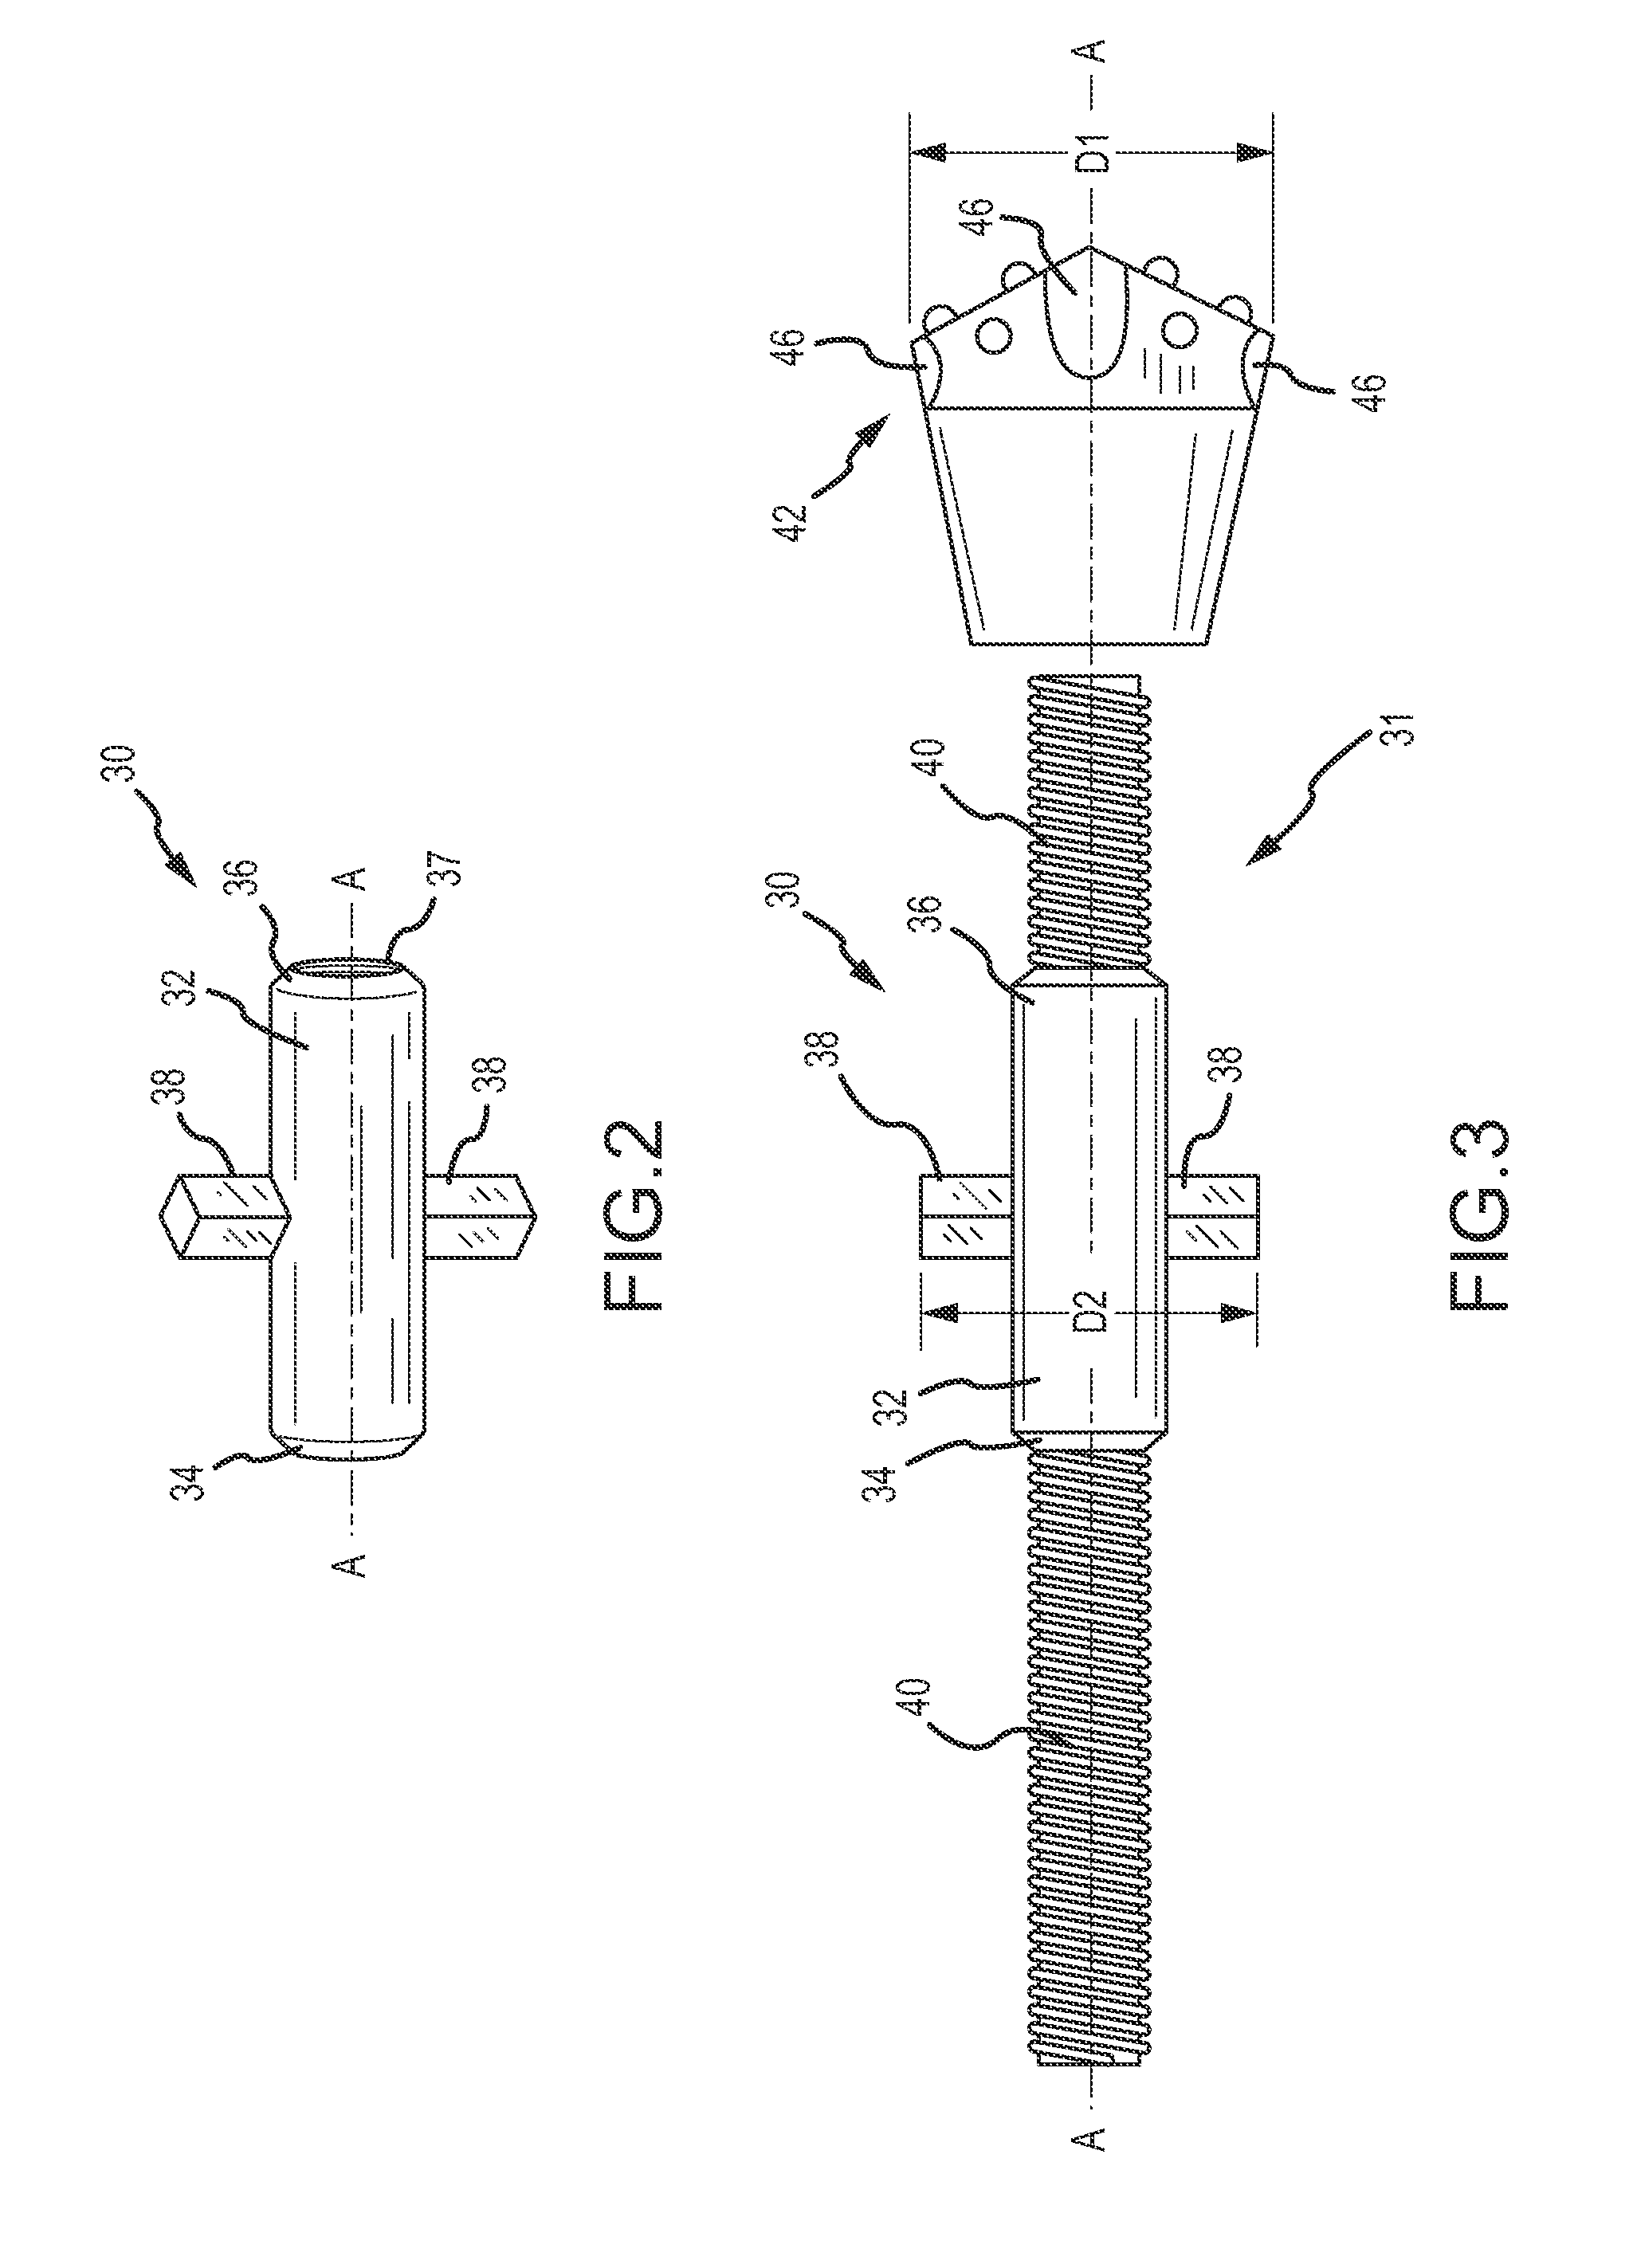 Coupler for soil nail and method of emplacing same